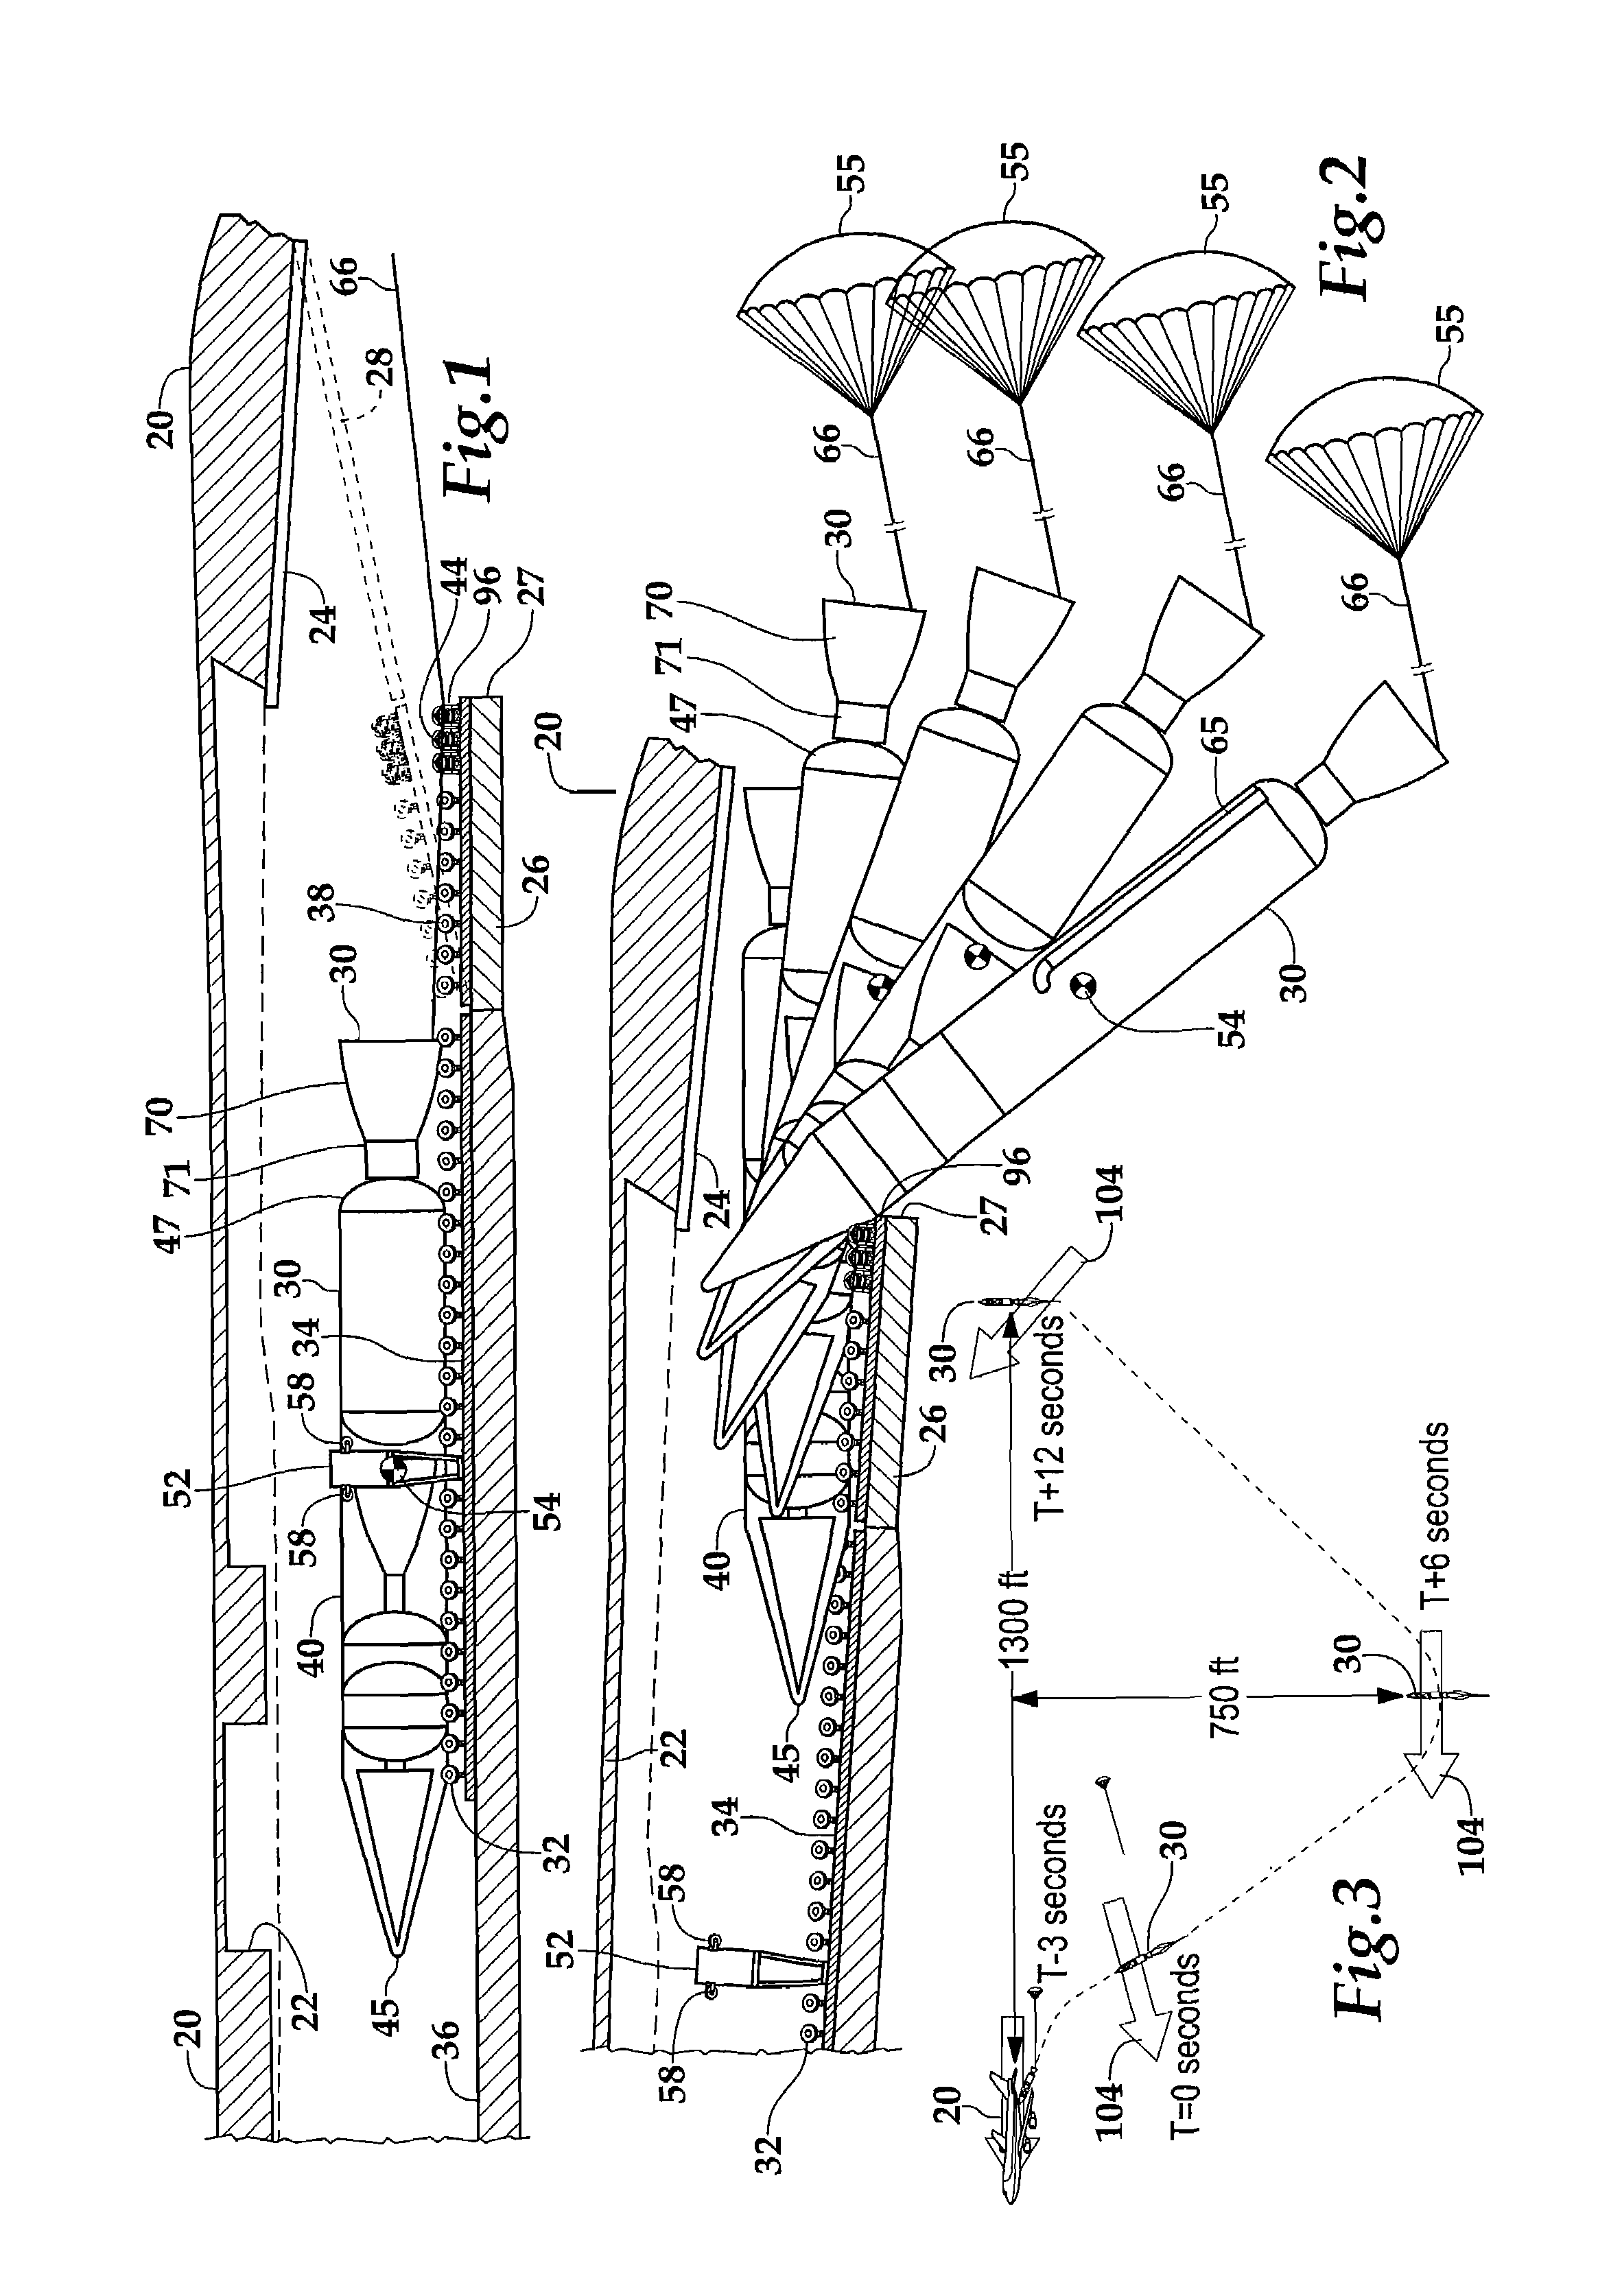 Gravity extraction air launch system for launch vehicle